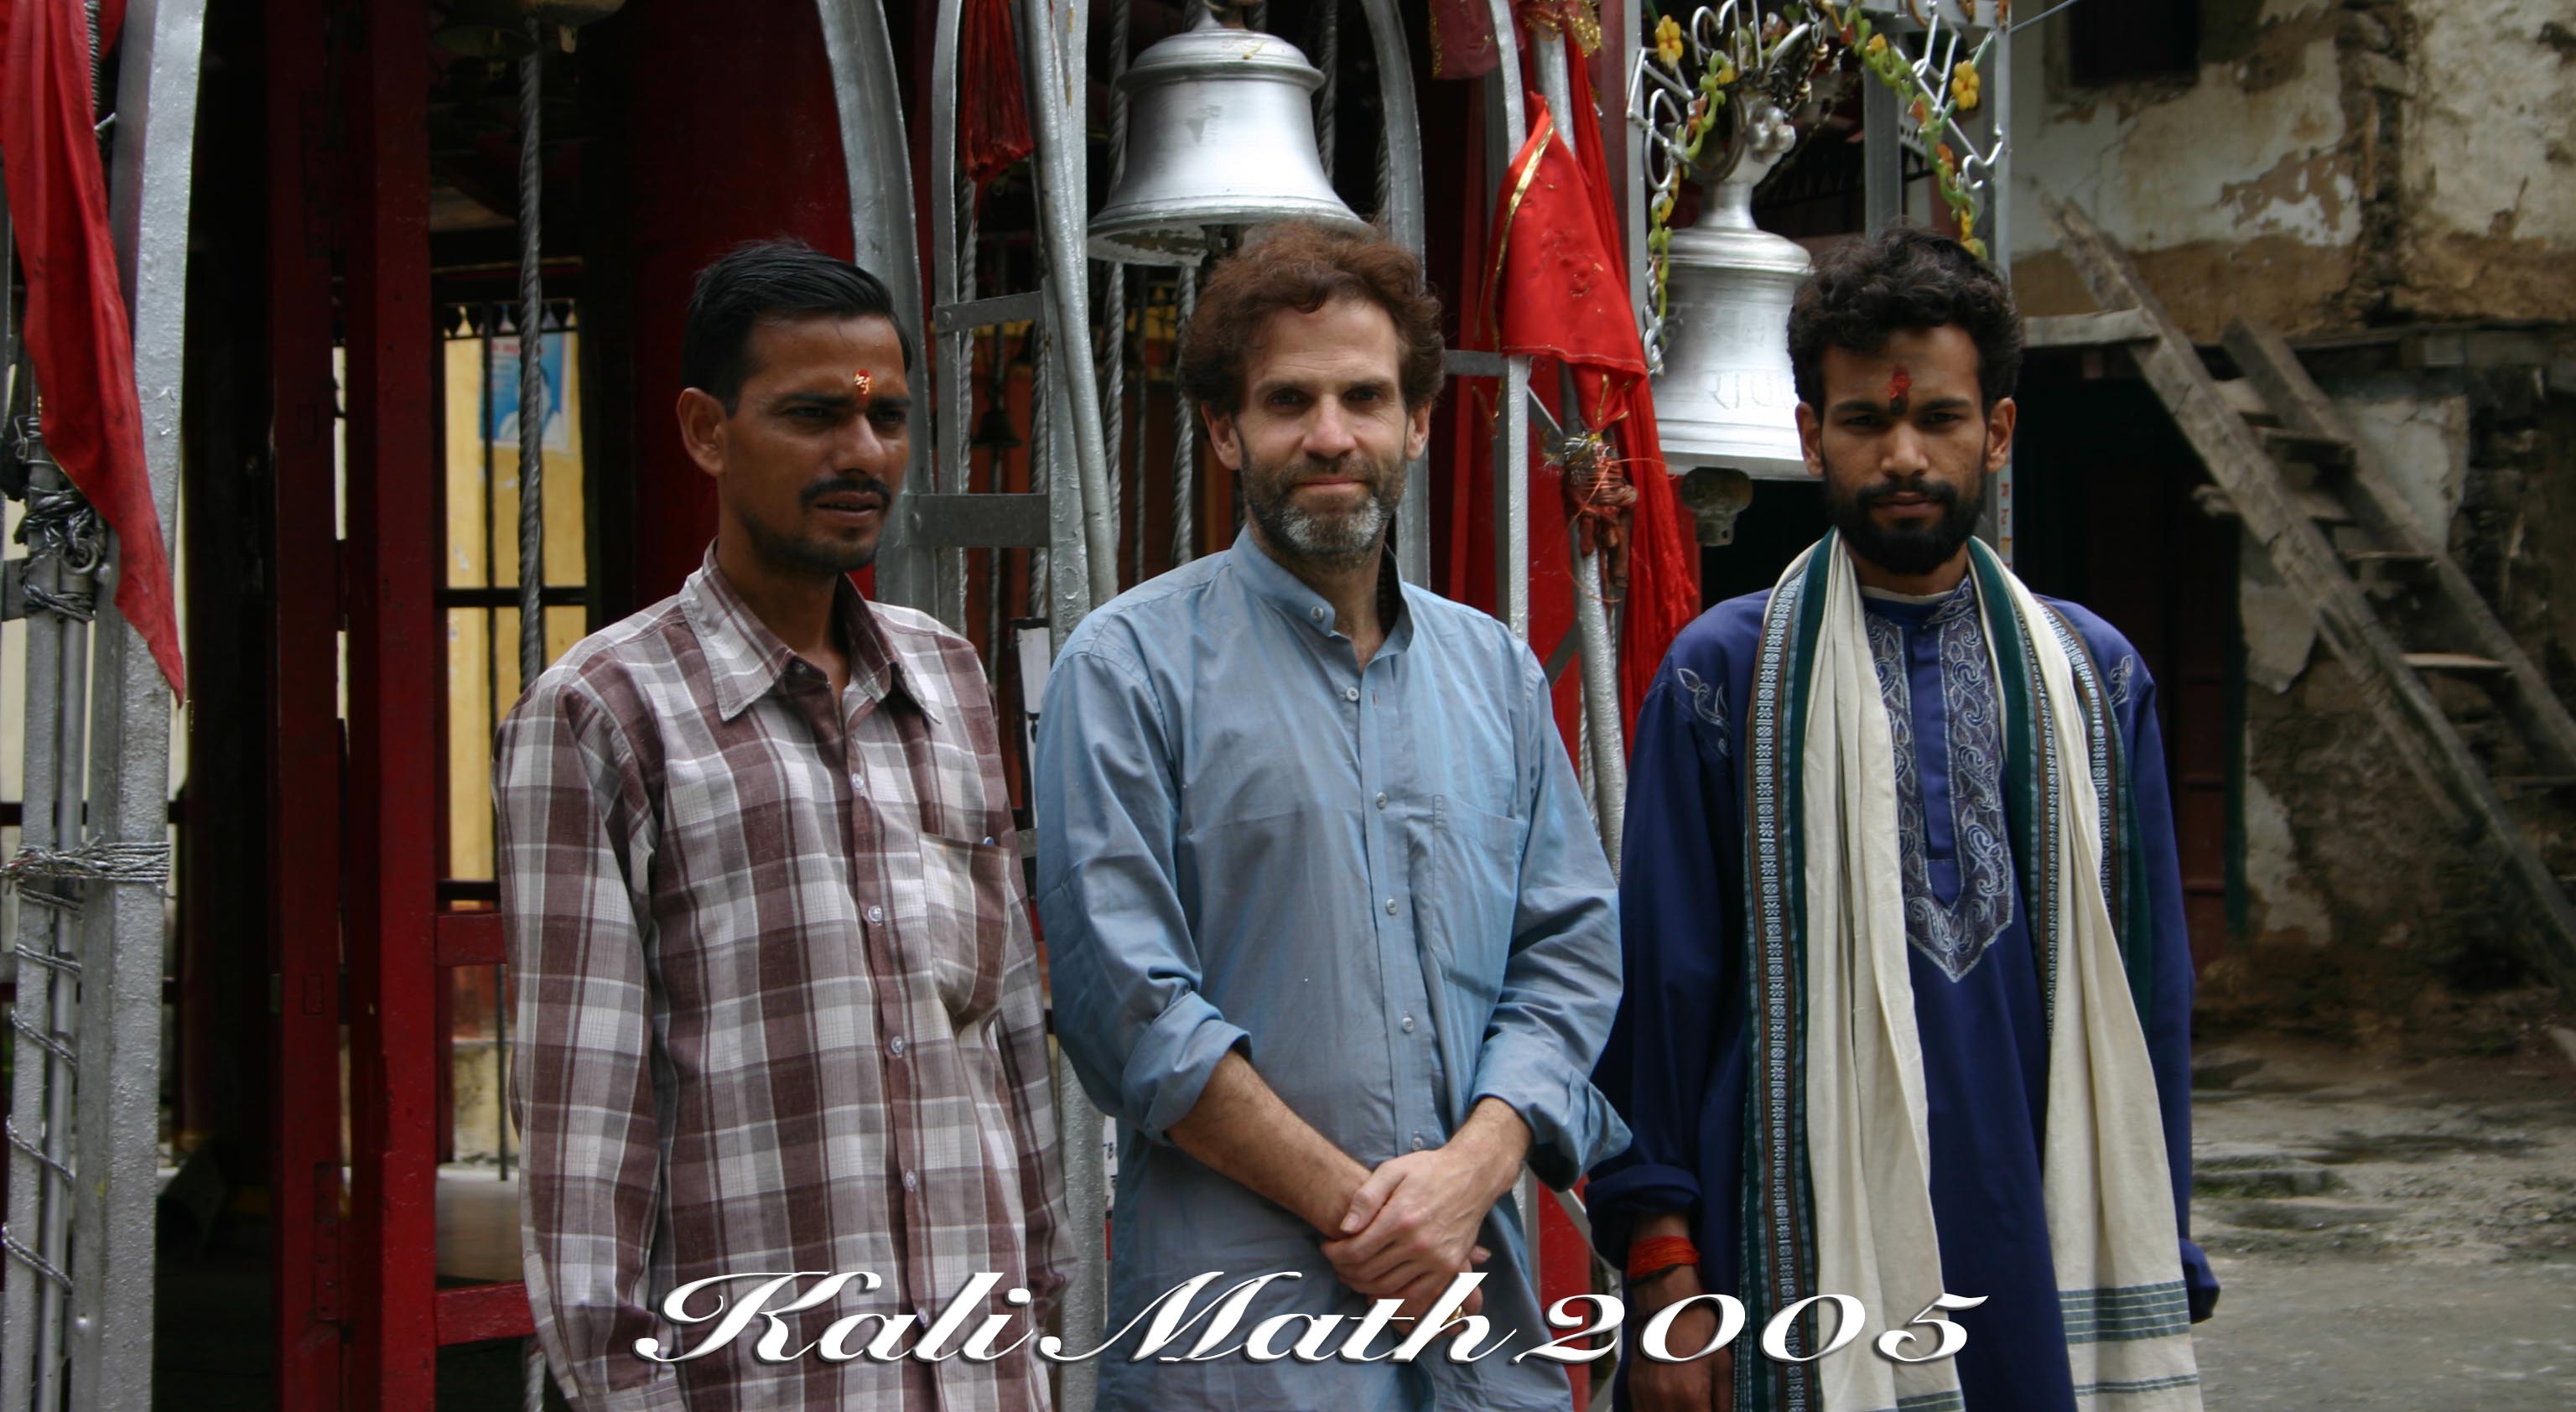 2005. Ganesh stand between two local villagers. The shrine is behind them, above them a bell used to herald newcomers to the town.